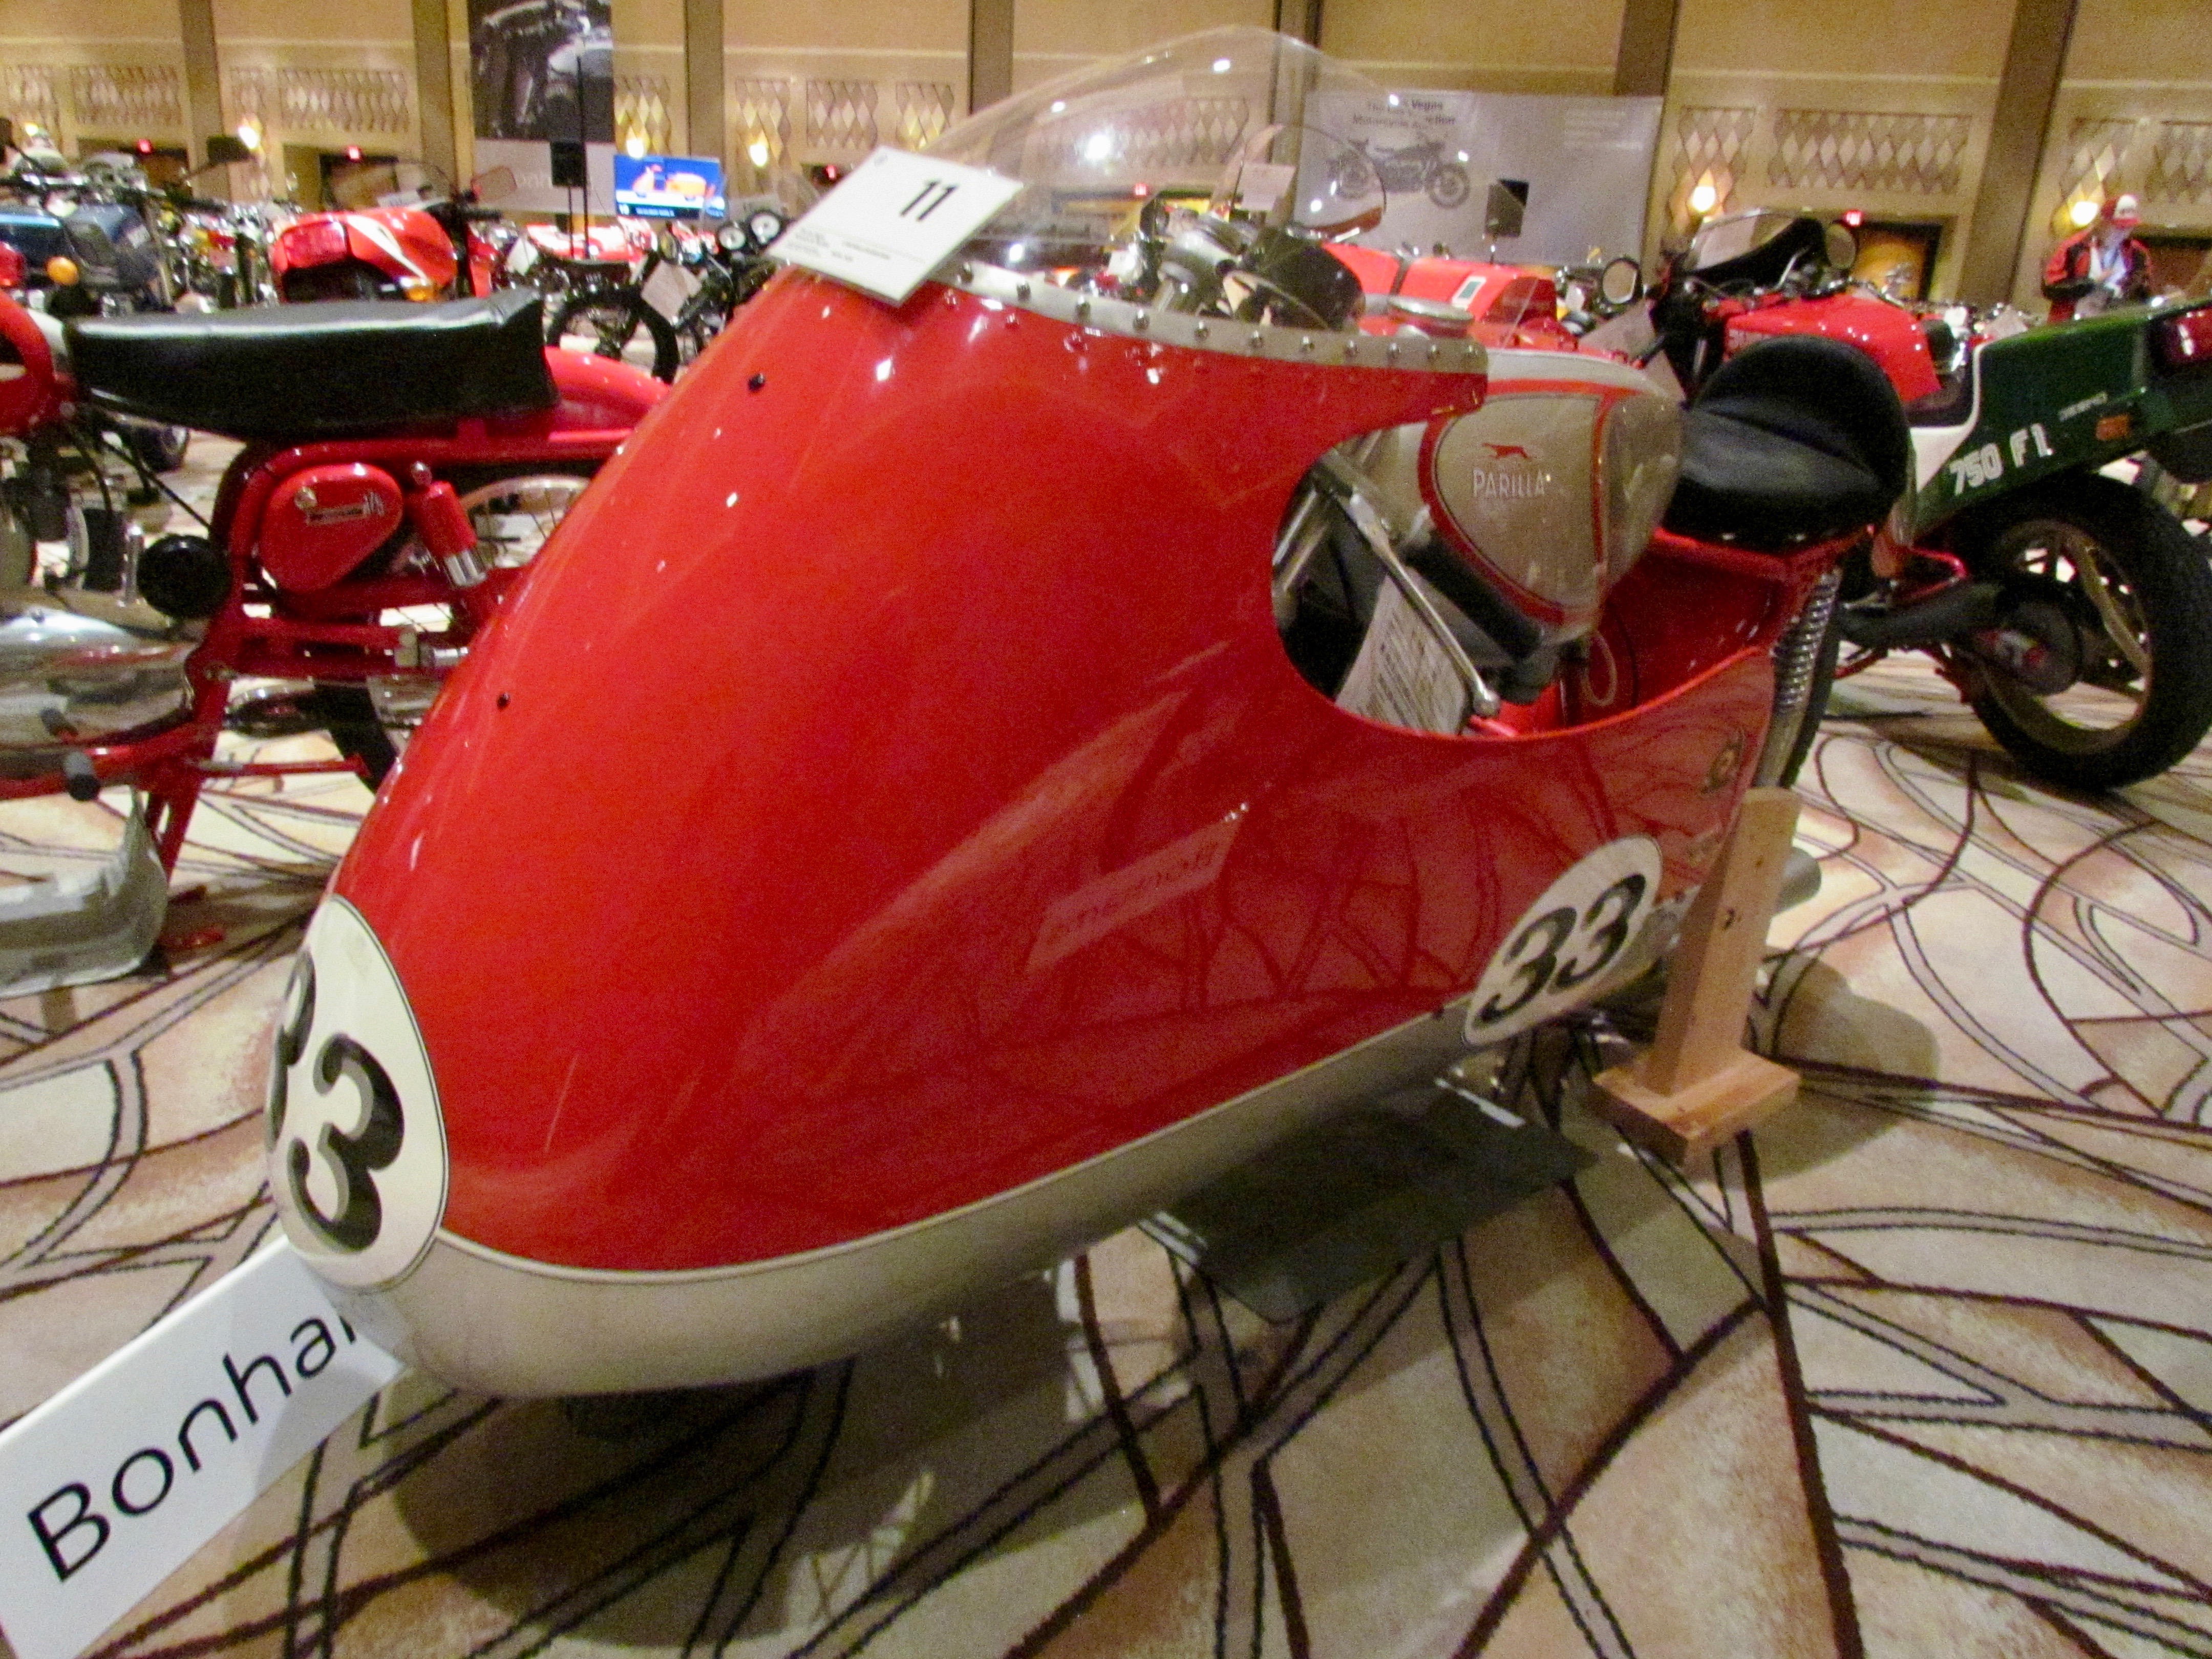 motorcycles, Larry’s likes at Bonhams’ Vegas motorcycle auction, ClassicCars.com Journal